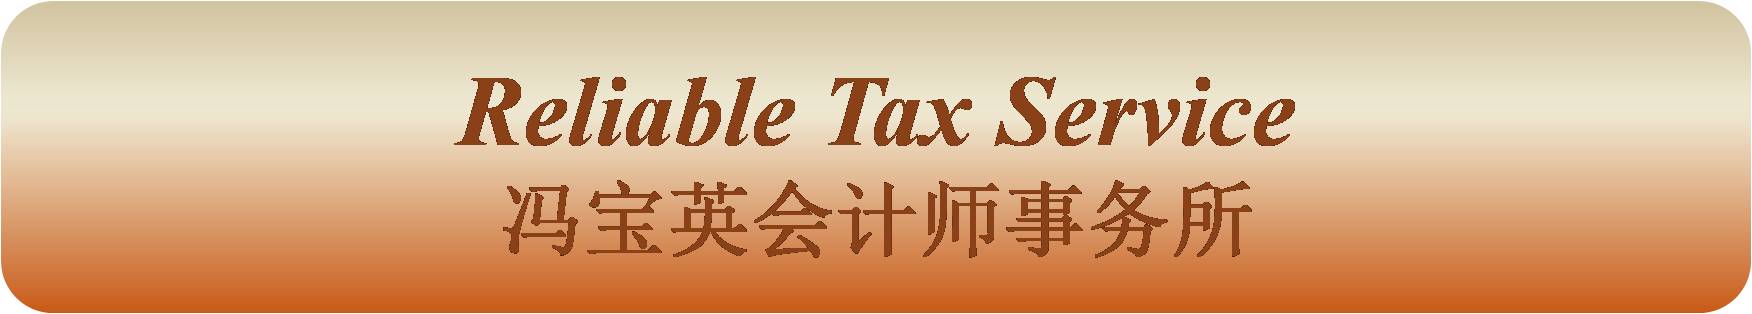 home-page-www-reliabletaxservice